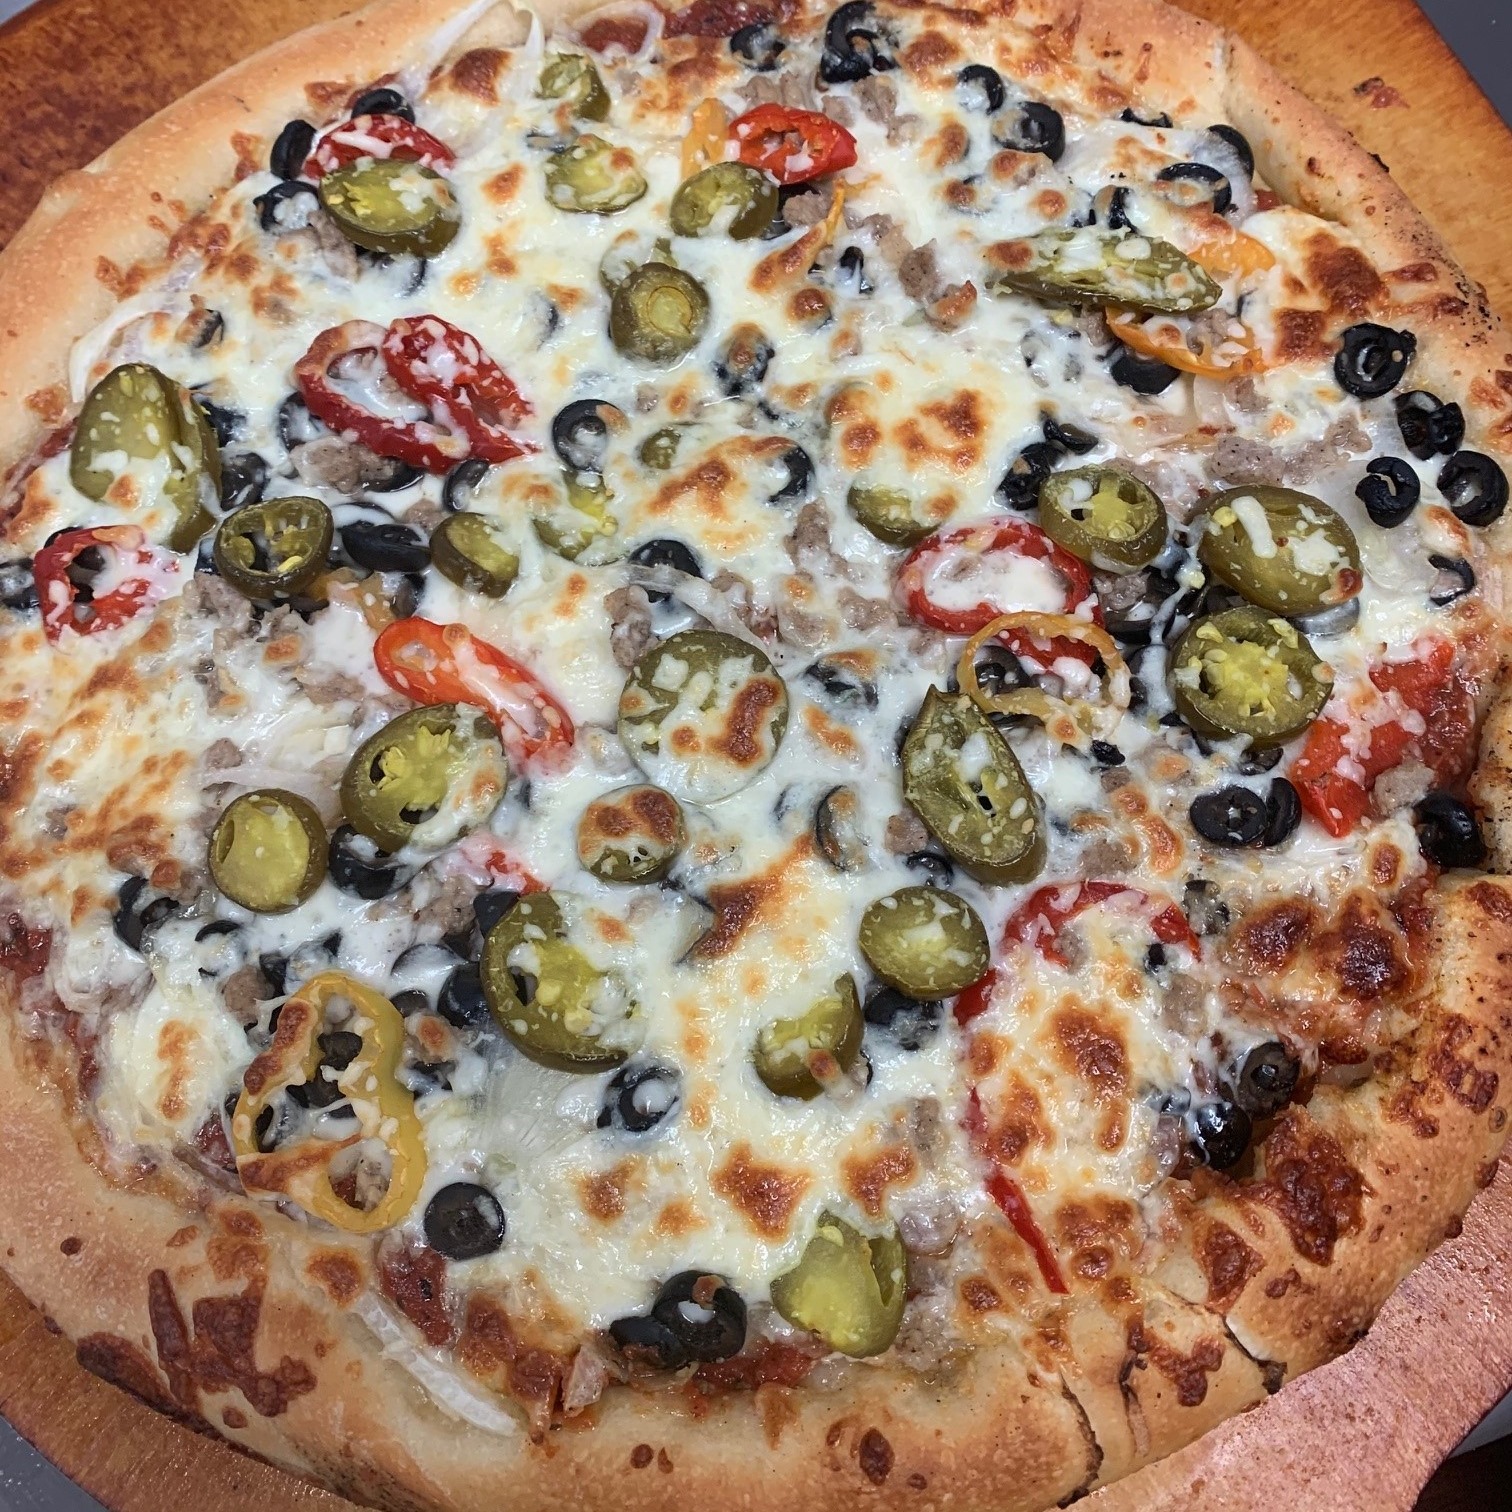 Pete’s Pizza and Pasta: For locally made, fresh-in-house goodness, Pete’s Pizza and Pasta is the restaurant to visit in the Shuswap. We make our pizza dough, sauces and spice blends fresh from scratch, using […]